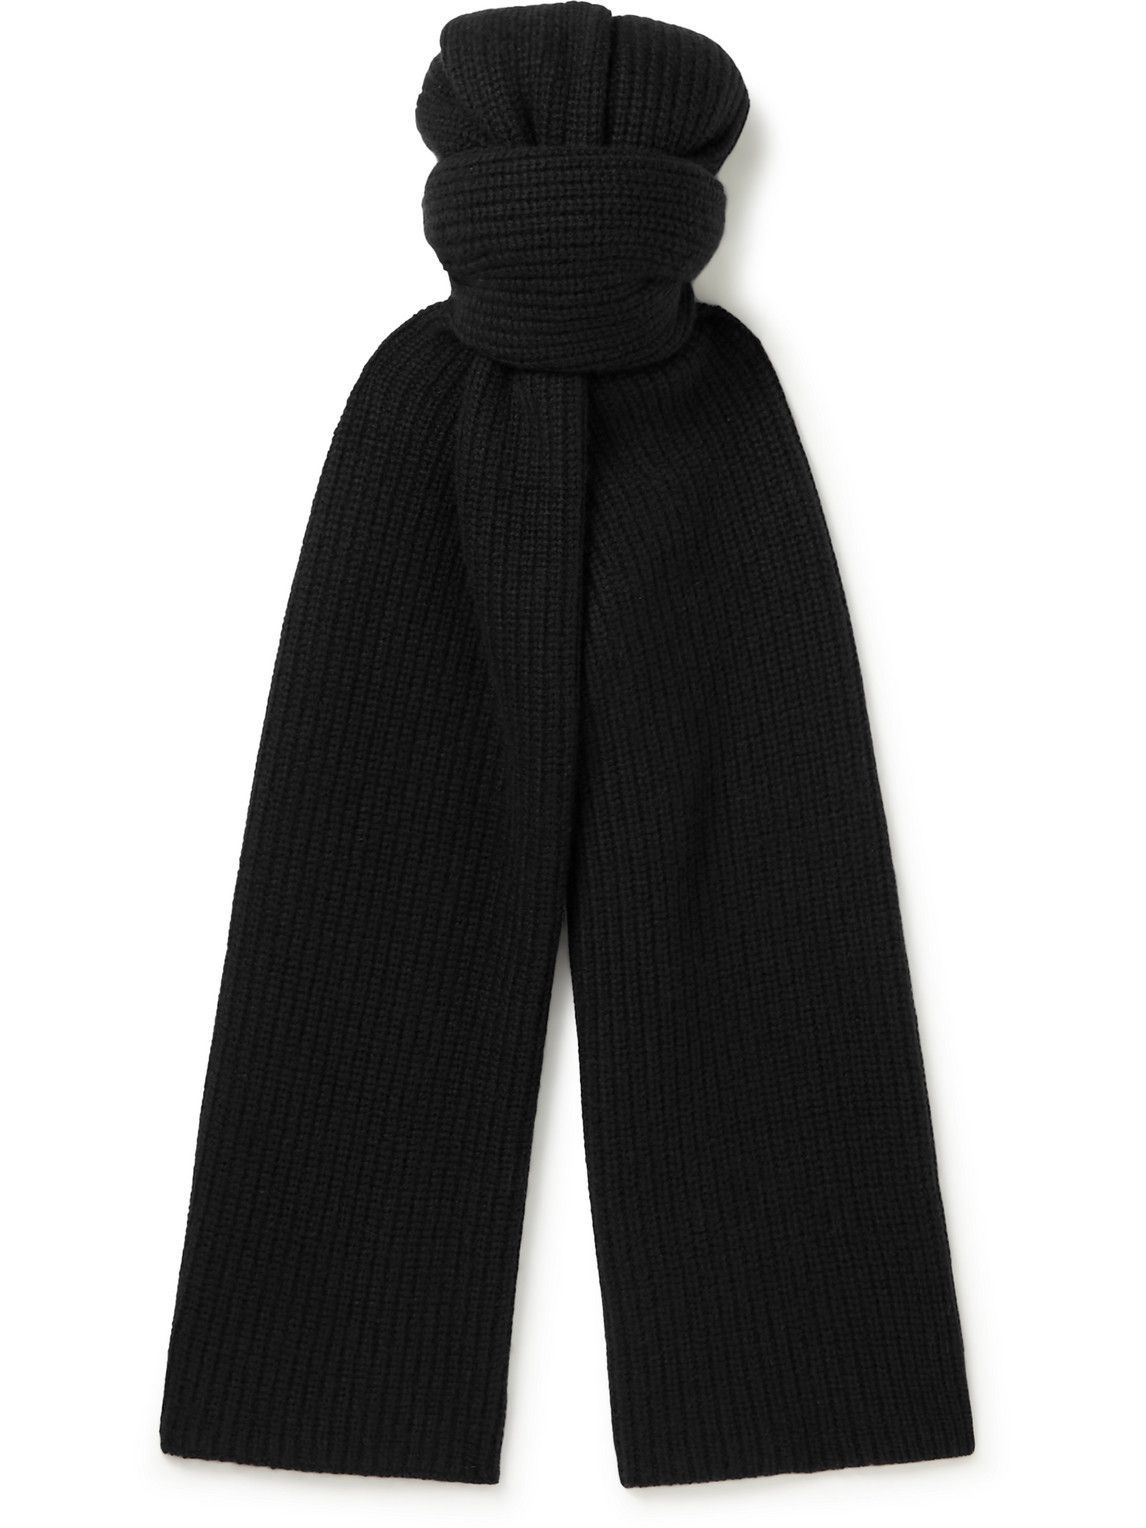 James Perse - Thermal Ribbed Recycled Cashmere Scarf James Perse